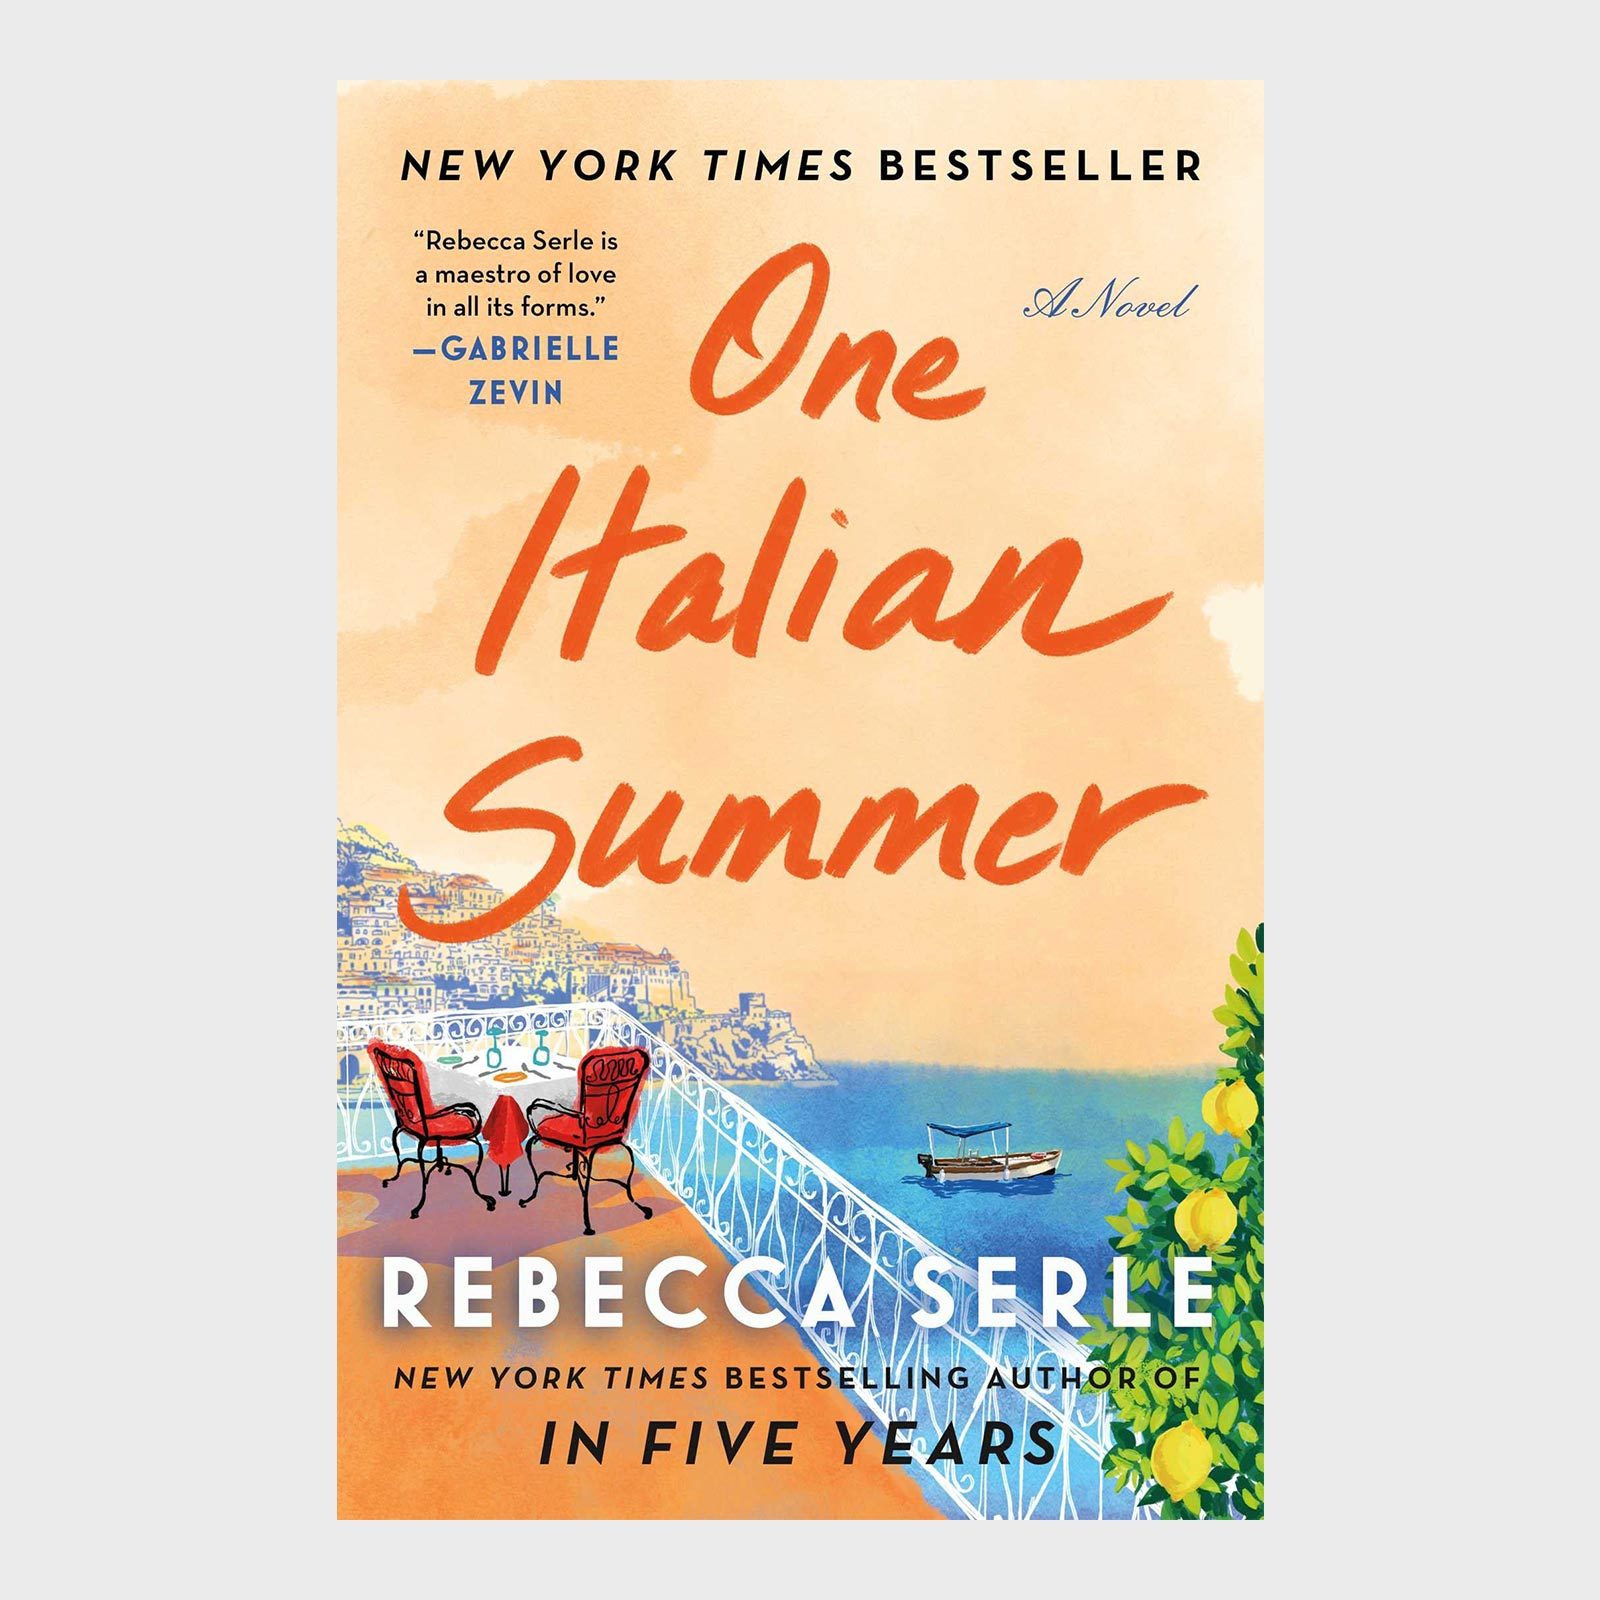 <h3><em>One Italian Summer</em> by Rebecca Serle</h3> <p><strong>Setting:</strong> Positano, Italy</p> <p>It's no secret that Rebecca Serle's 2022 captivating read, <a href="https://www.amazon.com/One-Italian-Summer-Rebecca-Serle-ebook/dp/B09842YZ1F" rel="noopener noreferrer"><em>One Italian Summer</em></a>, is dripping with European charm. Pair this book with an Aperol spritz or Italian soda for full effect. Part <a href="https://www.rd.com/list/mother-daughter-books/" rel="noopener noreferrer">mother-daughter book</a>, part <a href="https://www.rd.com/list/the-best-fantasy-books/" rel="noopener noreferrer">fantasy book</a> (with a bit of romance sprinkled in), the story takes place at the Hotel Poseidon, perched on Italy's Amalfi coast. A woman grieving her mother arrives at the door with a head full of questions. Is she happy? Does she even love her husband? What's the meaning of life? As the summer unfolds, the magic of Positano—and knowledge about her mother's past life—transforms her forever.</p> <p class="listicle-page__cta-button-shop"><a class="shop-btn" href="https://www.amazon.com/One-Italian-Summer-Rebecca-Serle-ebook/dp/B09842YZ1F">Shop Now</a></p>